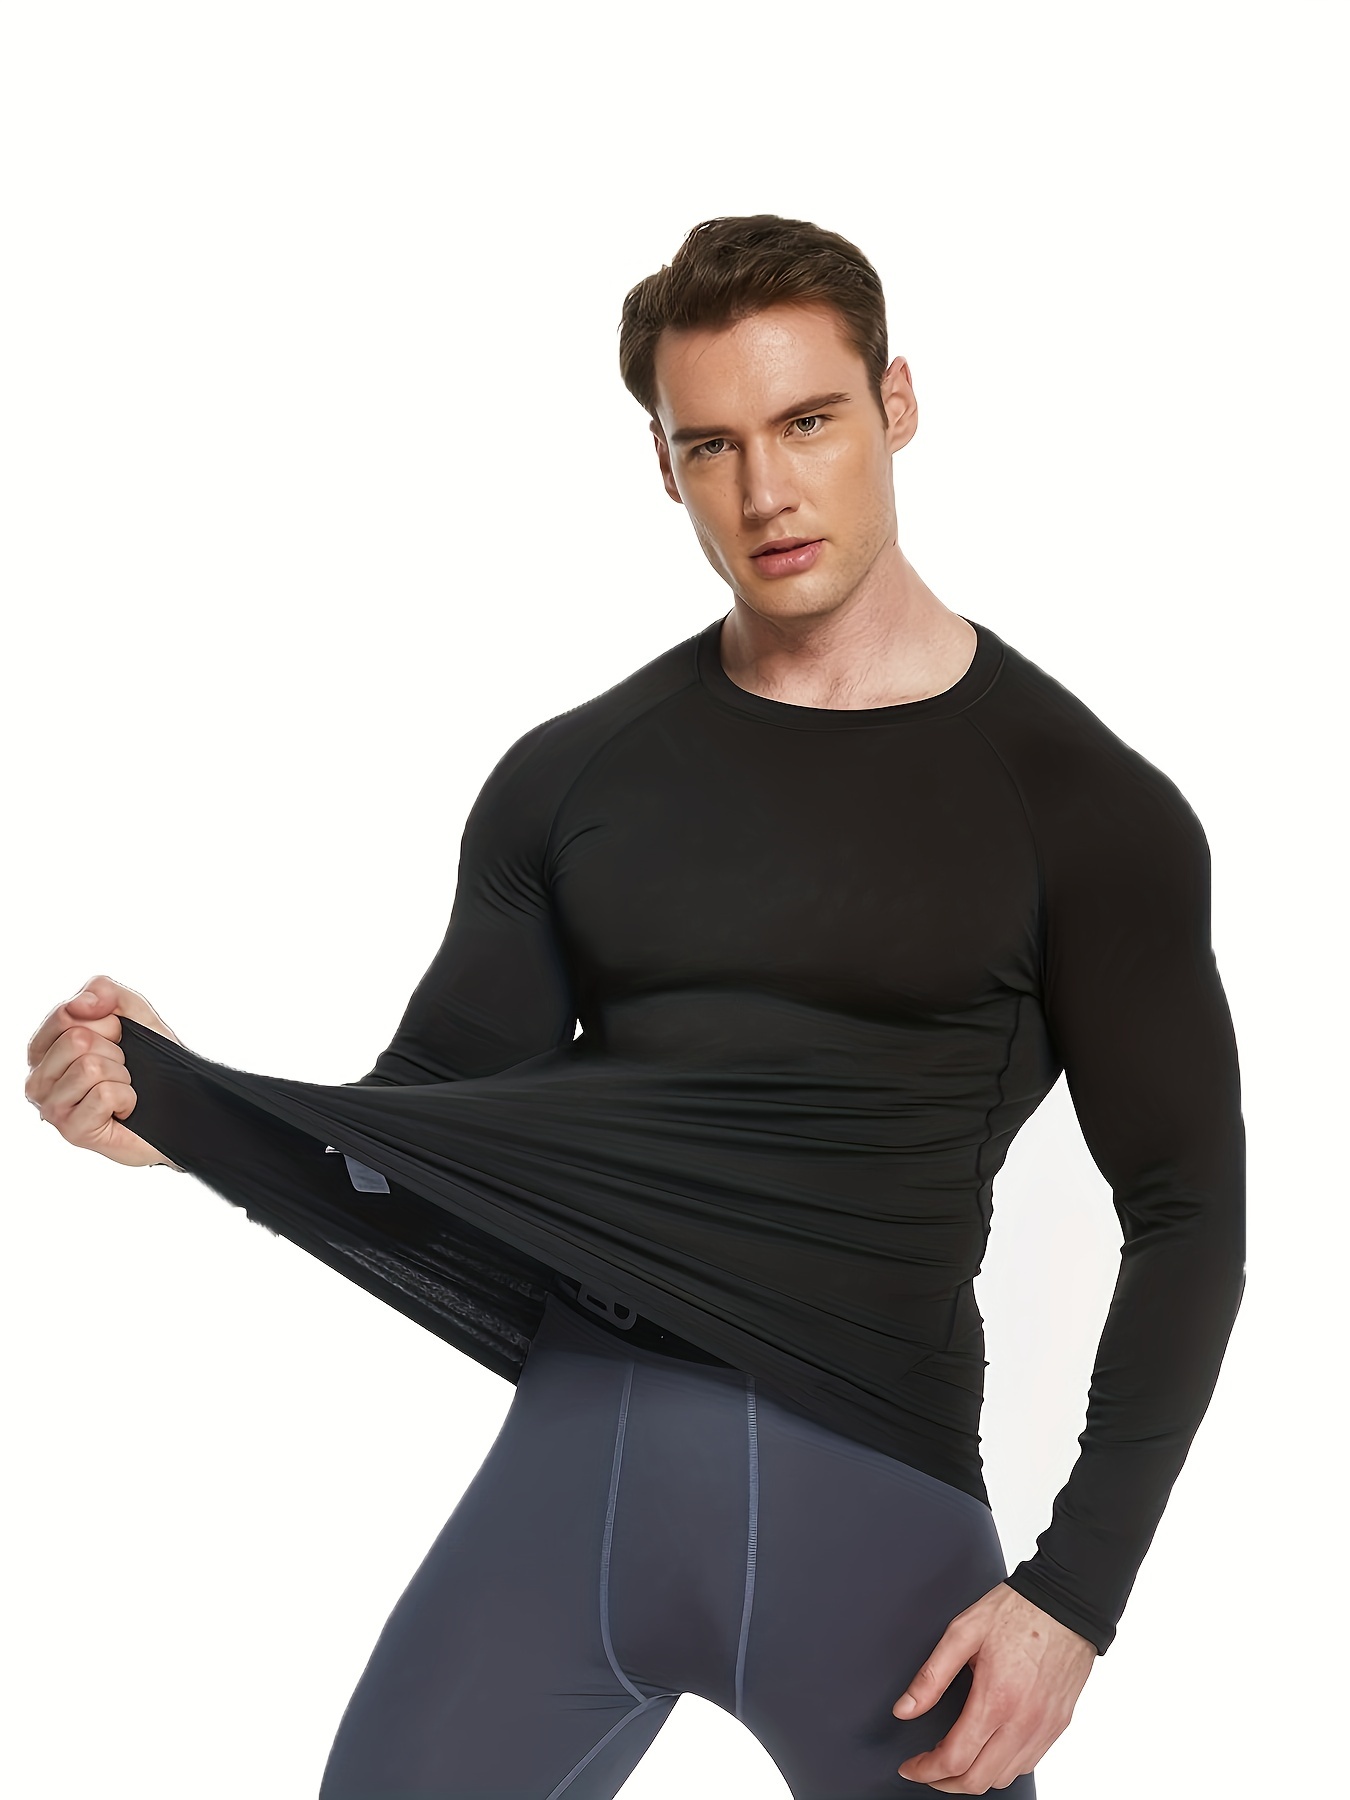  4 Pack Compression Shirts for Men Long Sleeve Athletic